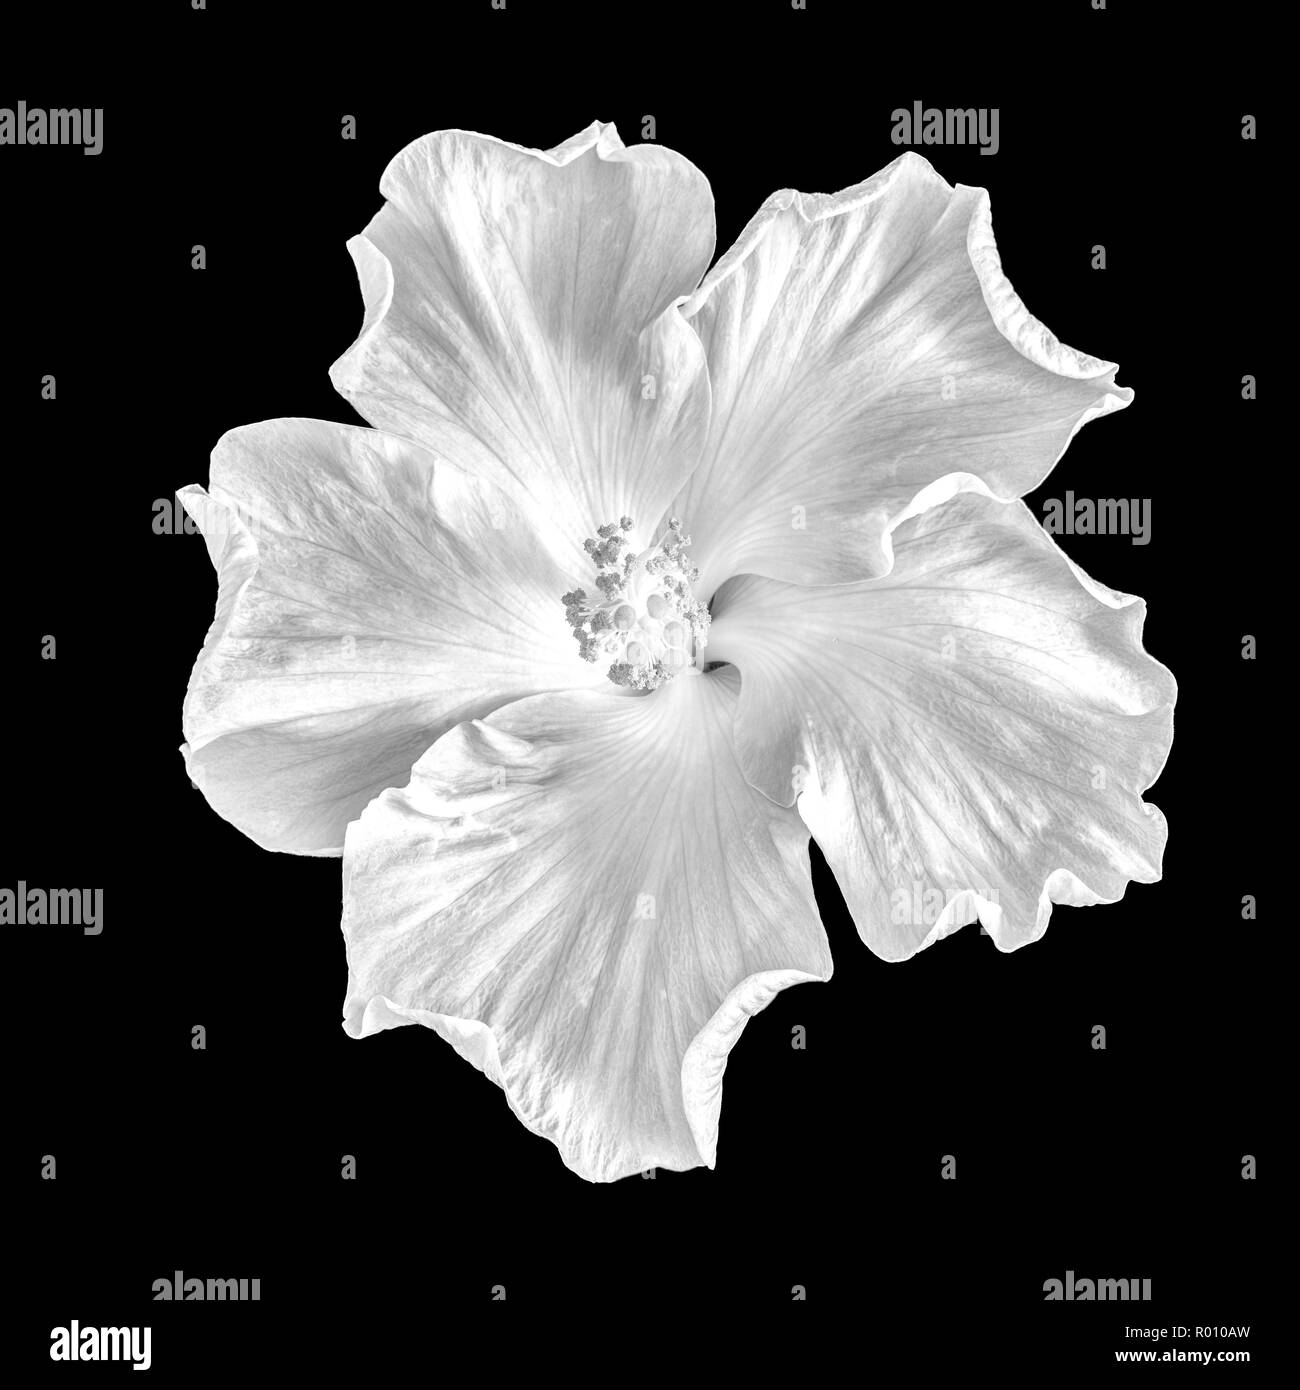 Fine art still life floral black and white monochrome macro flower photography of a single isolated blooming wide open hibiscus blossom on black Stock Photo